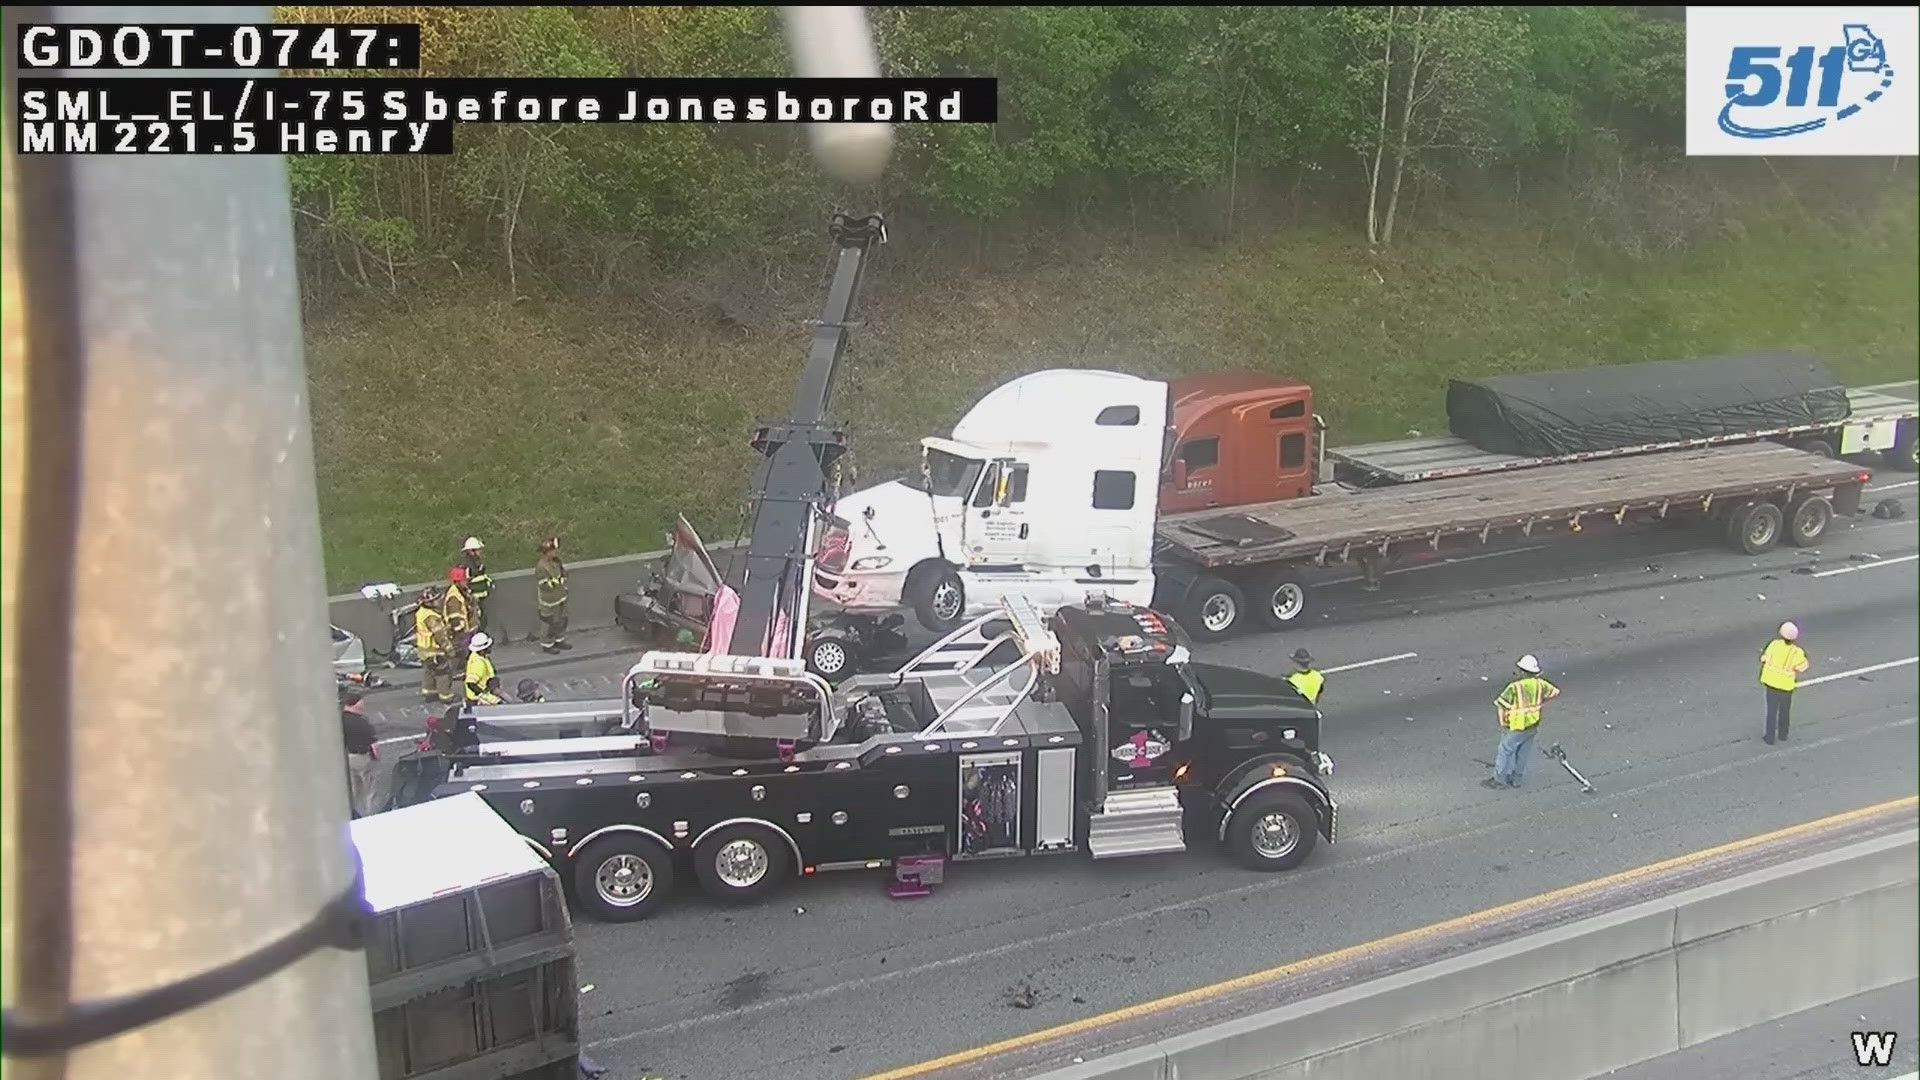 GDOT said the crash happened in the southbound lanes just before the Jonesboro Road exit.